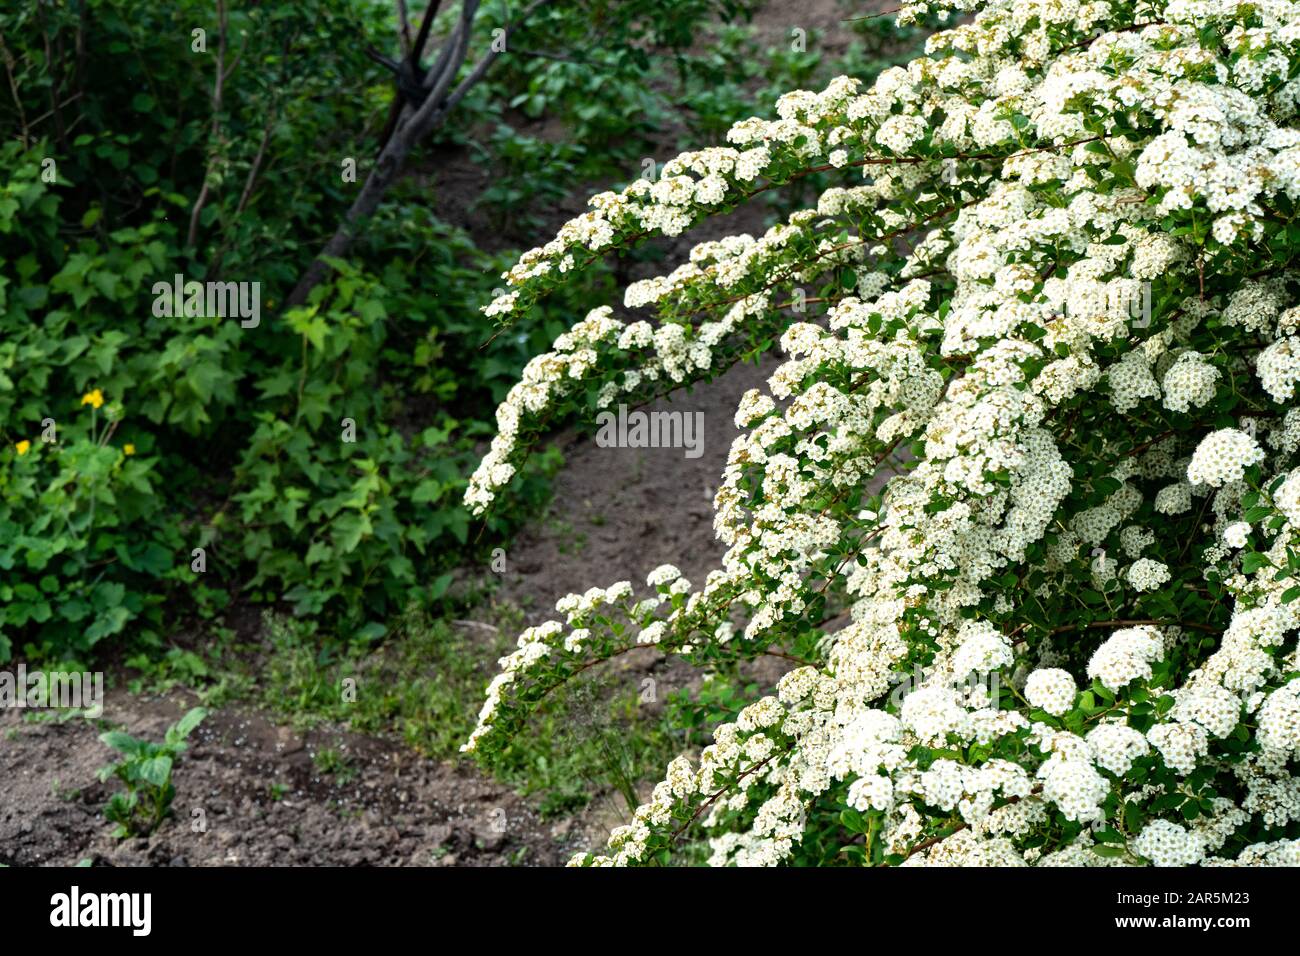 Blooming spirea or meadowsweet. Branches with white flowers. Stock Photo